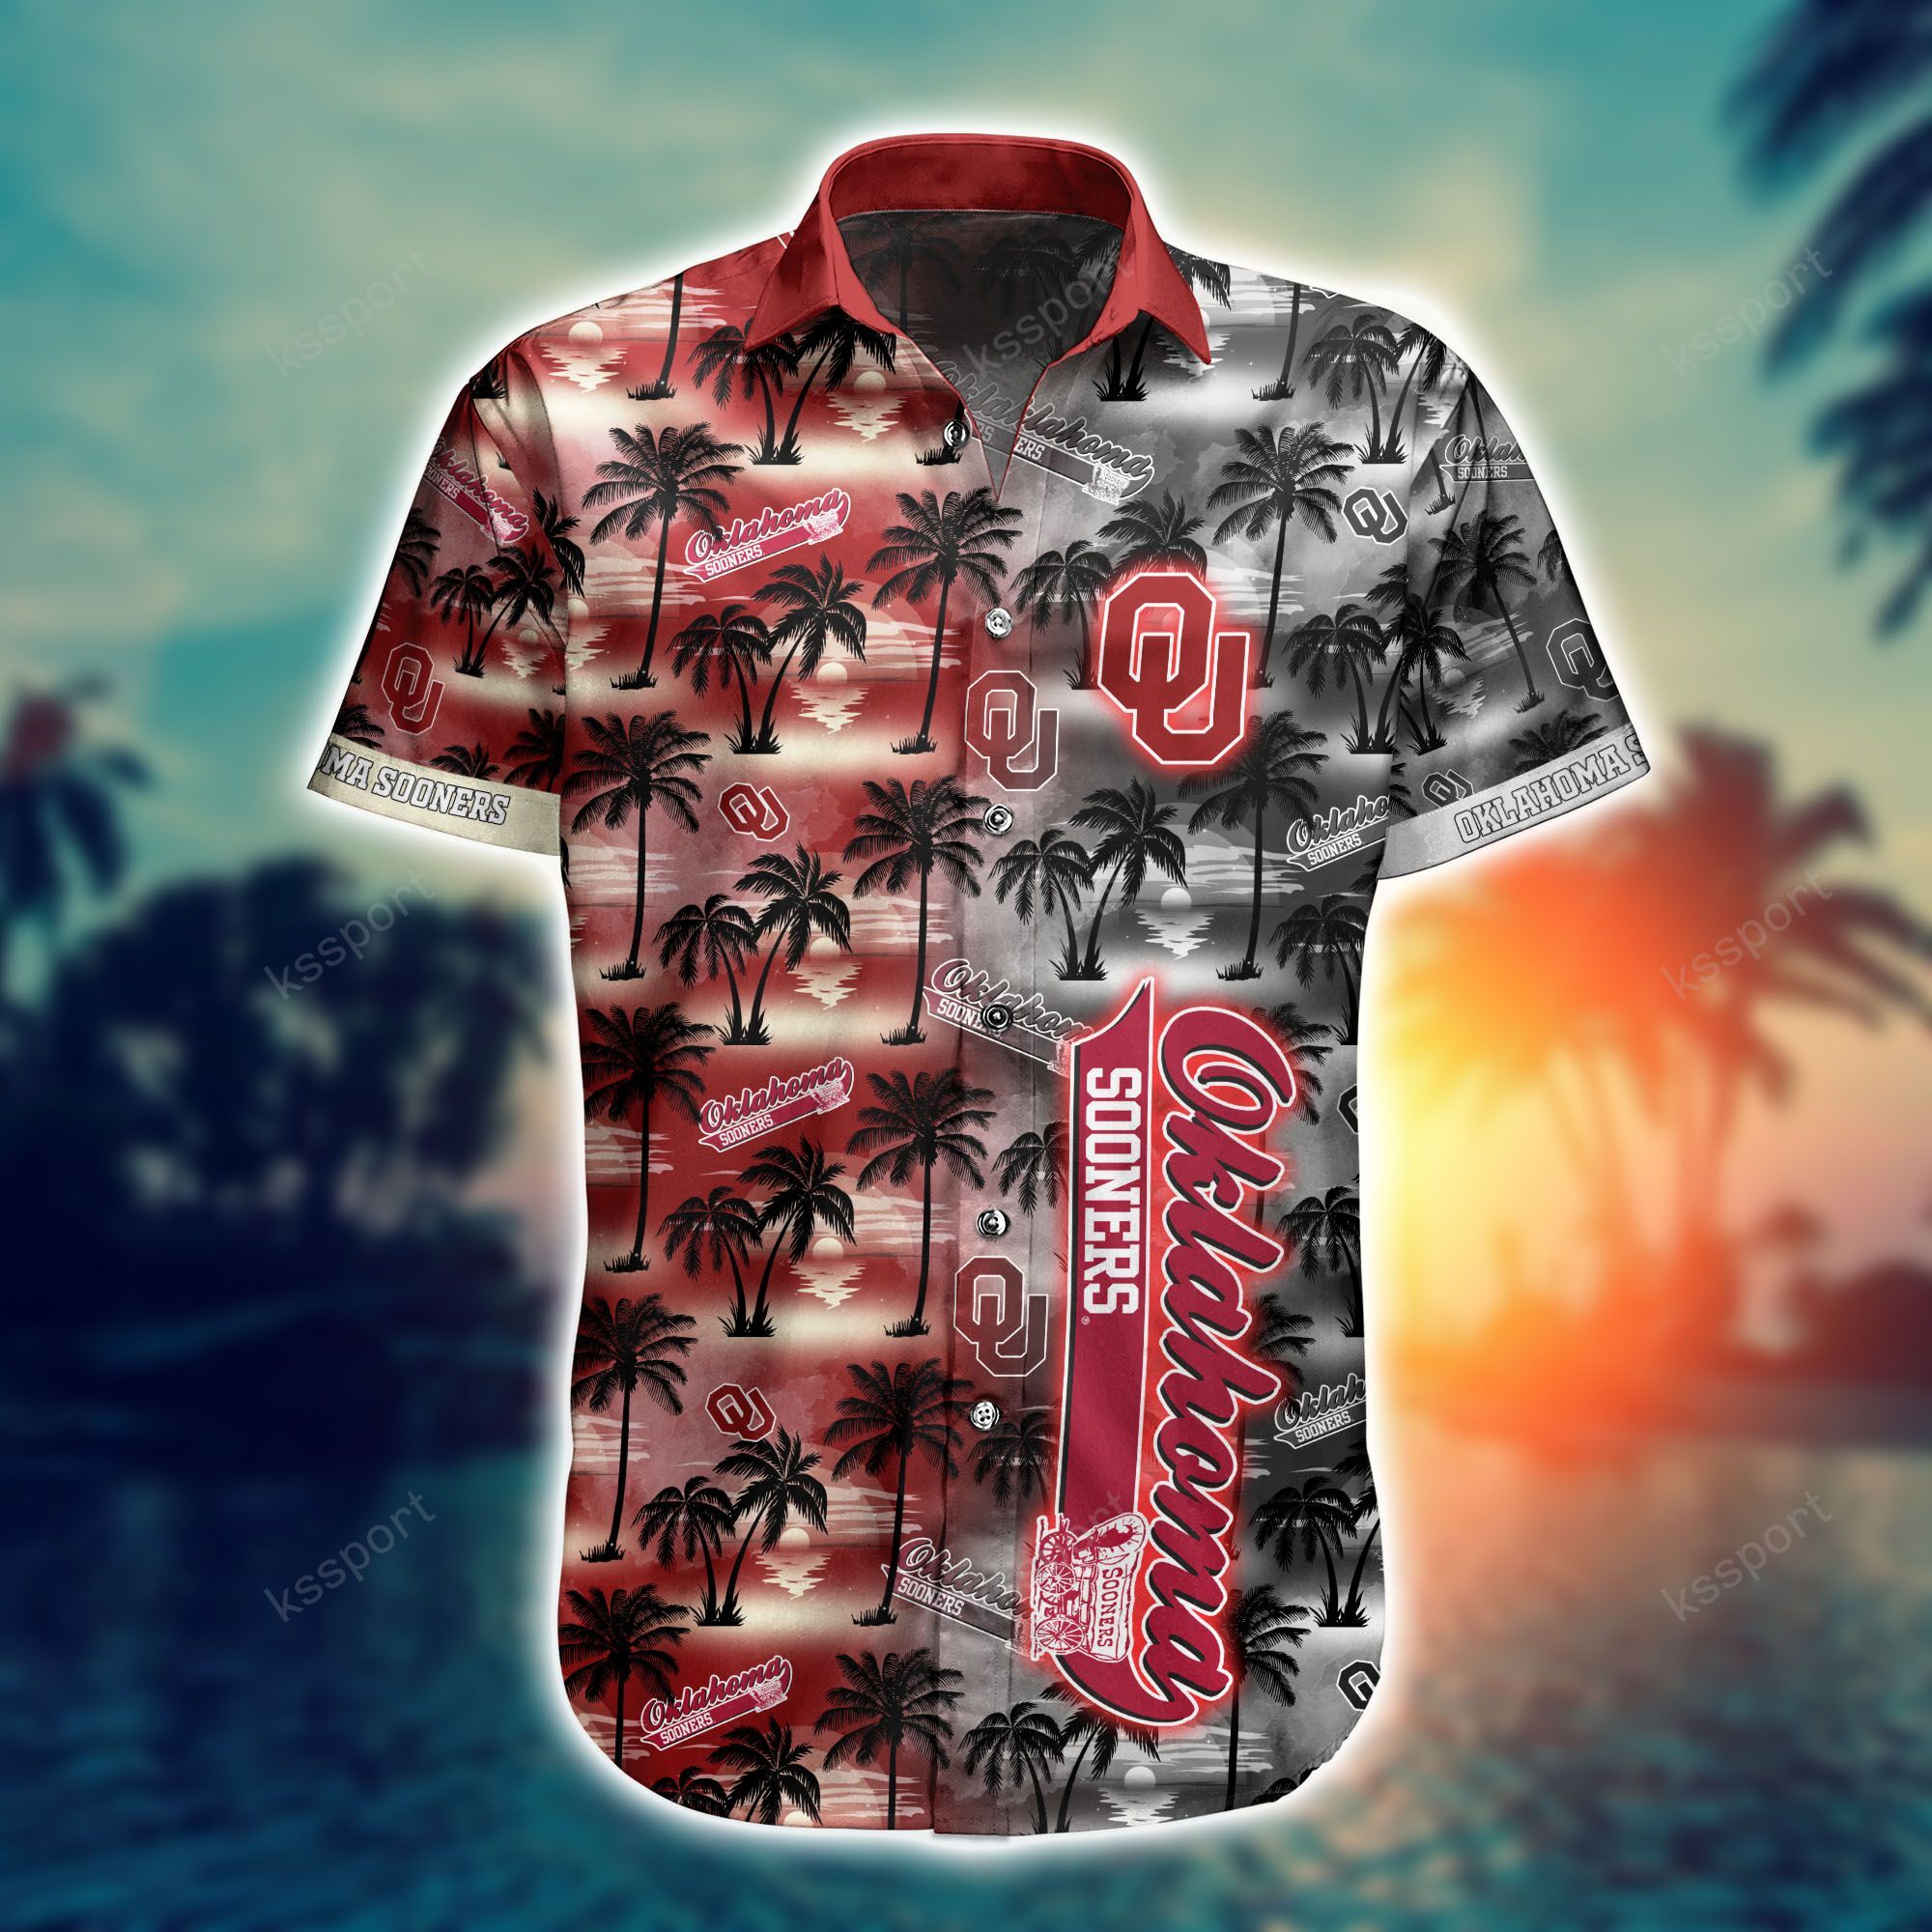 Top cool Hawaiian shirt 2022 - Make sure you get yours today before they run out! 161